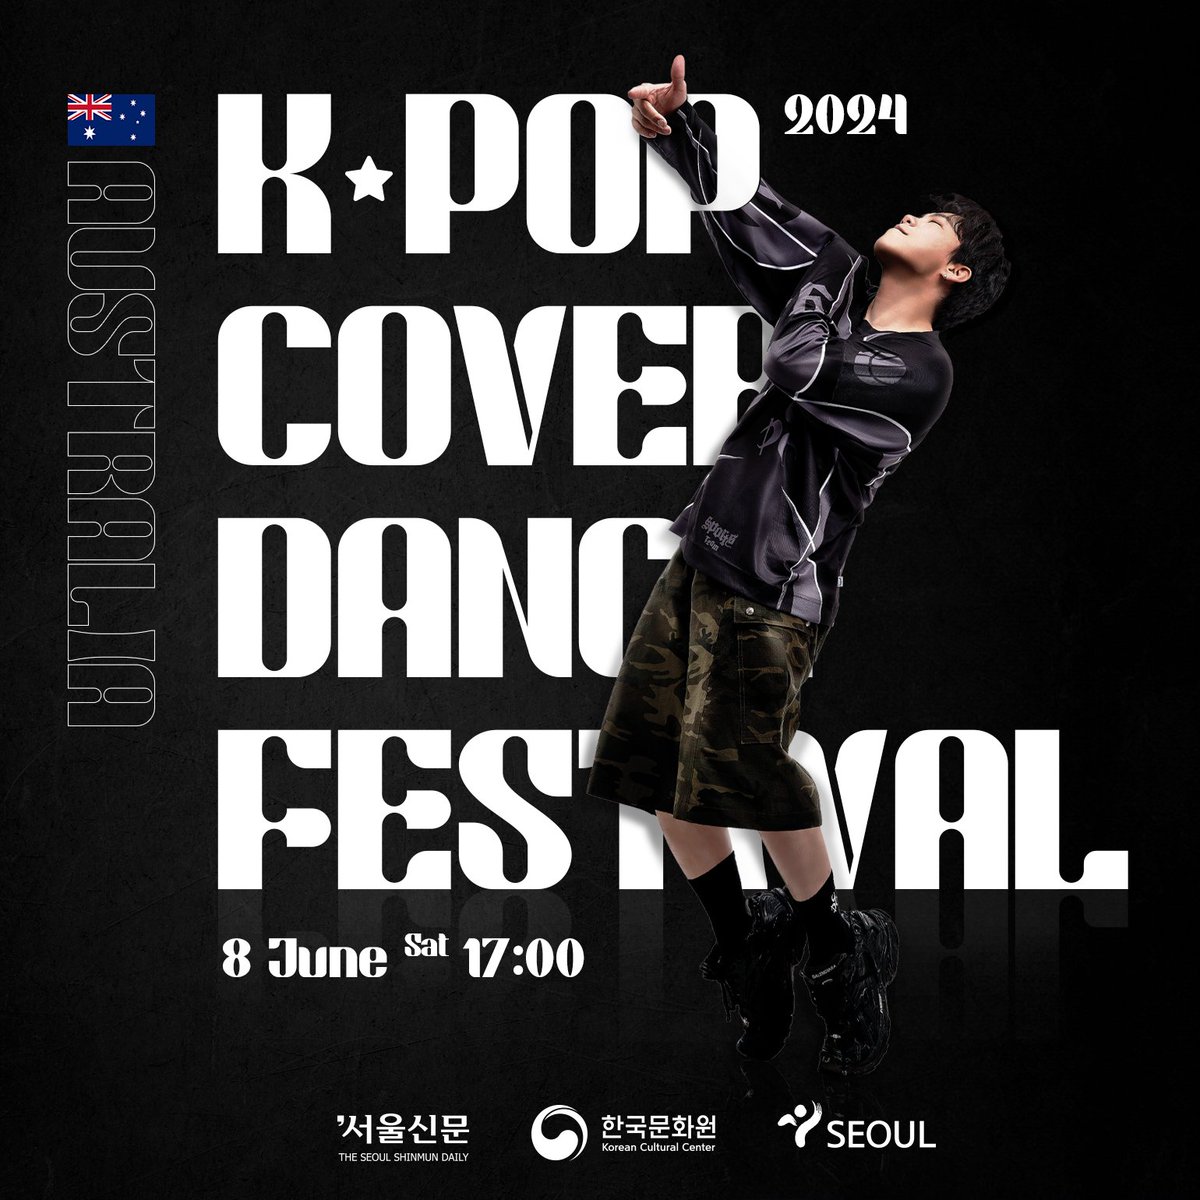 2024 K-pop Cover Dance Festival ticket sales are now OPEN! Make sure to redeem your tickets ASAP so that you can attend the epic celebration of K-Pop culture and talent. This year, we are thrilled to welcome RYU D as our special guest! For more info:koreanculture.org.au/2024-k-pop-cov…